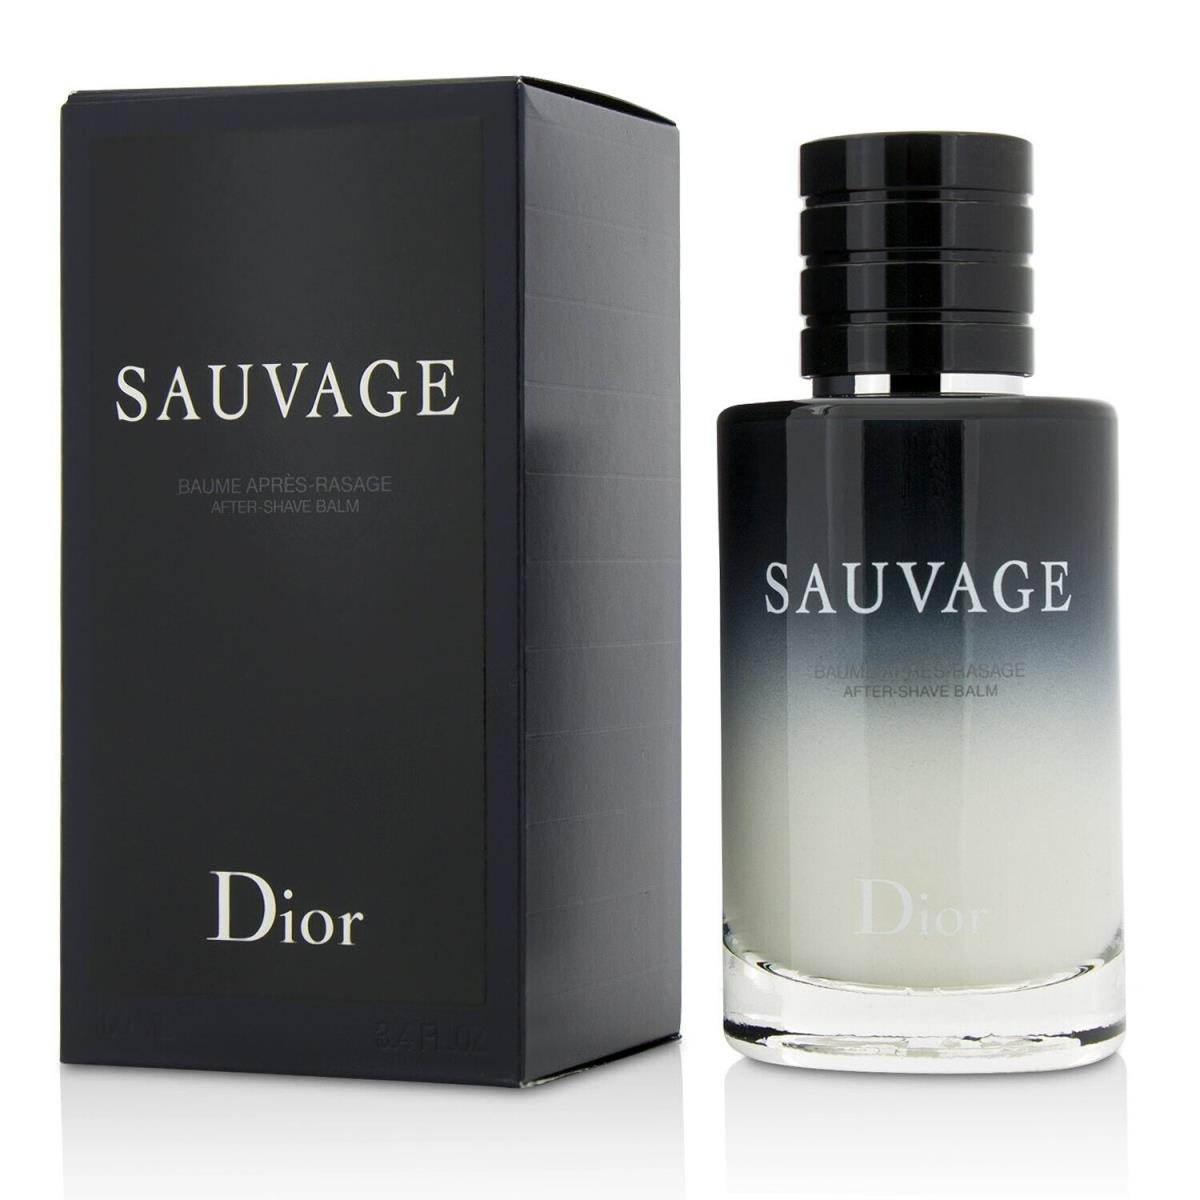 Dior Sauvage After Shave Balm 3.4 oz / 100 ml